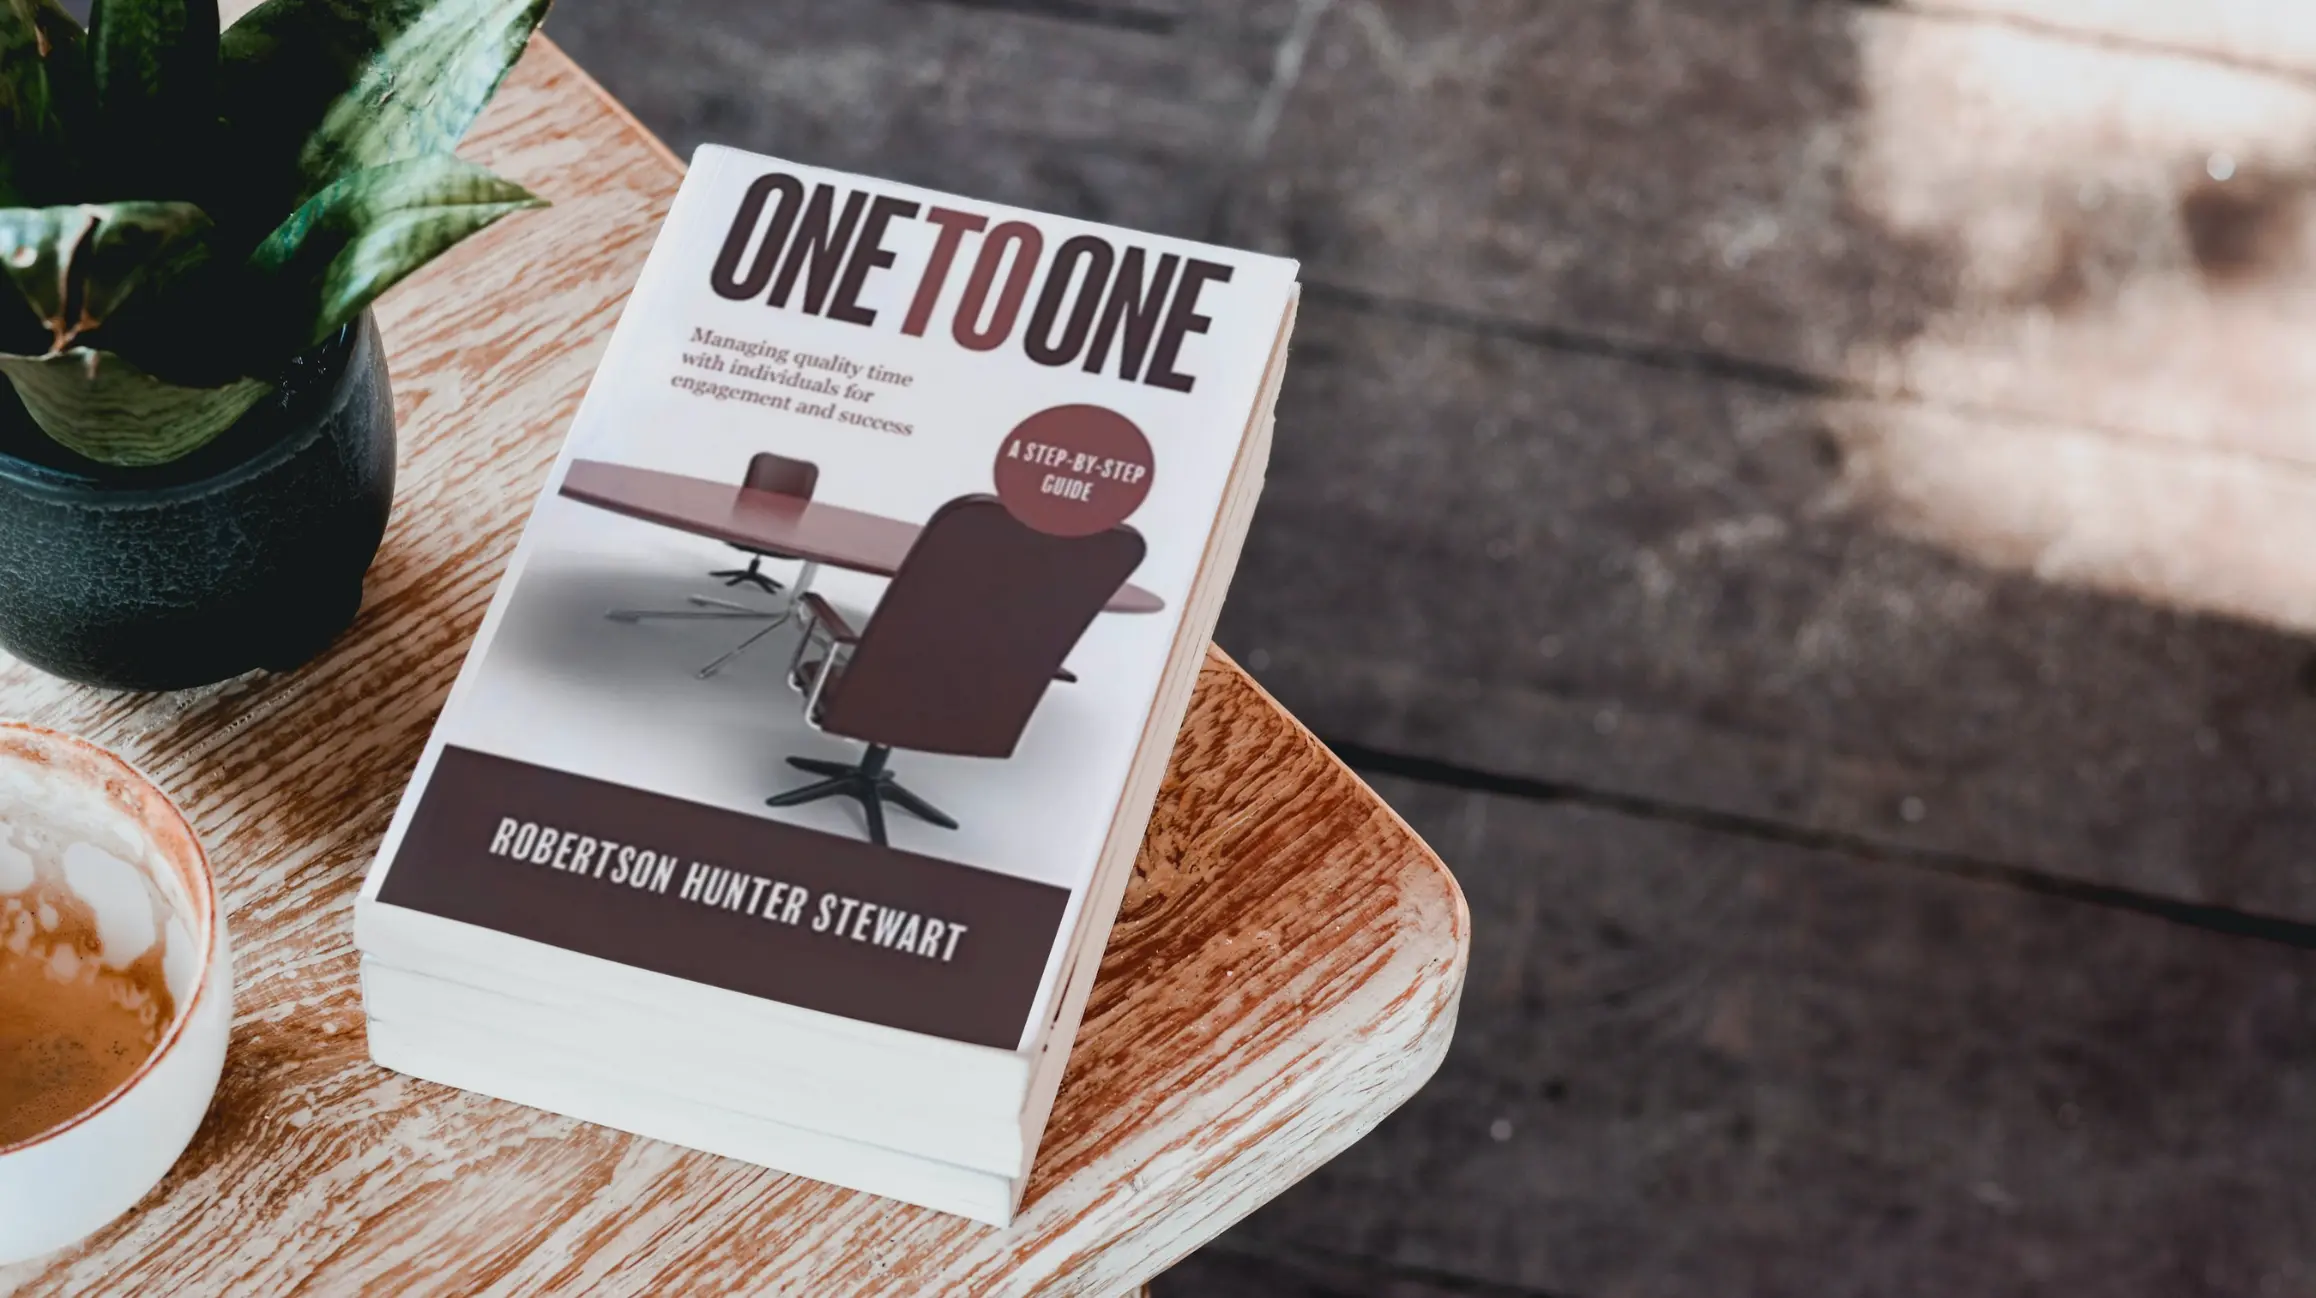 Book one to one by Robertson Stewart